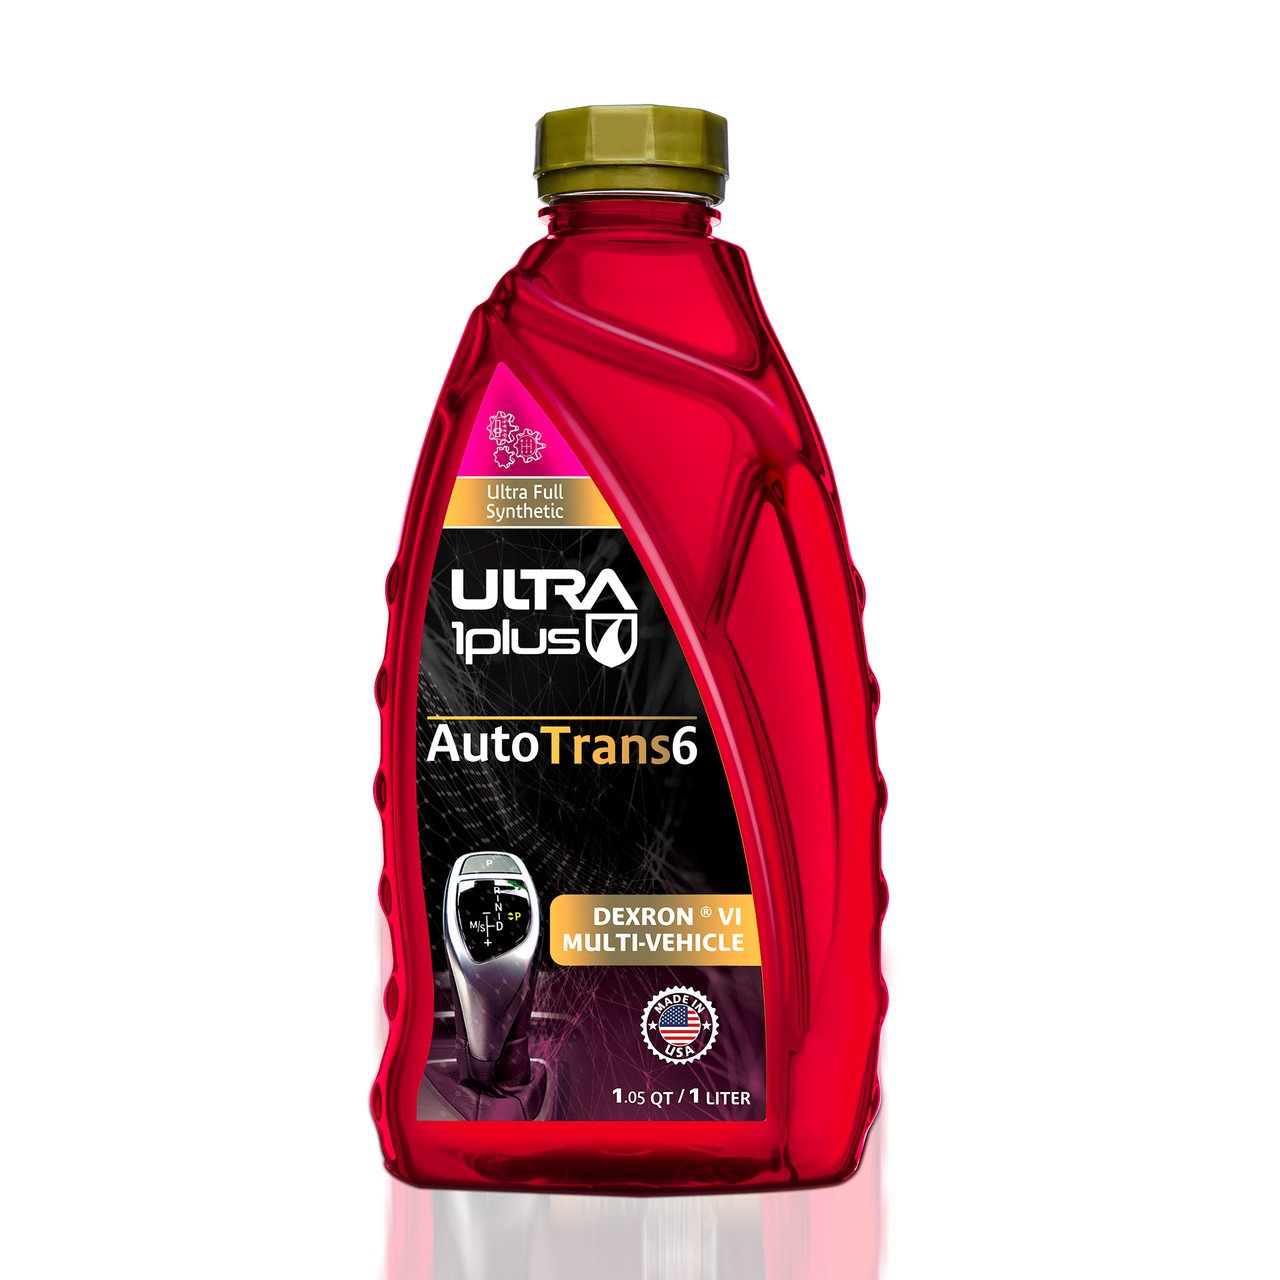 ACEITE ATF DEXRON VI FULL SYNTHETIC TRANSMISSION FLUID MULTI-VEHICLE | ULTRA1PLUS™